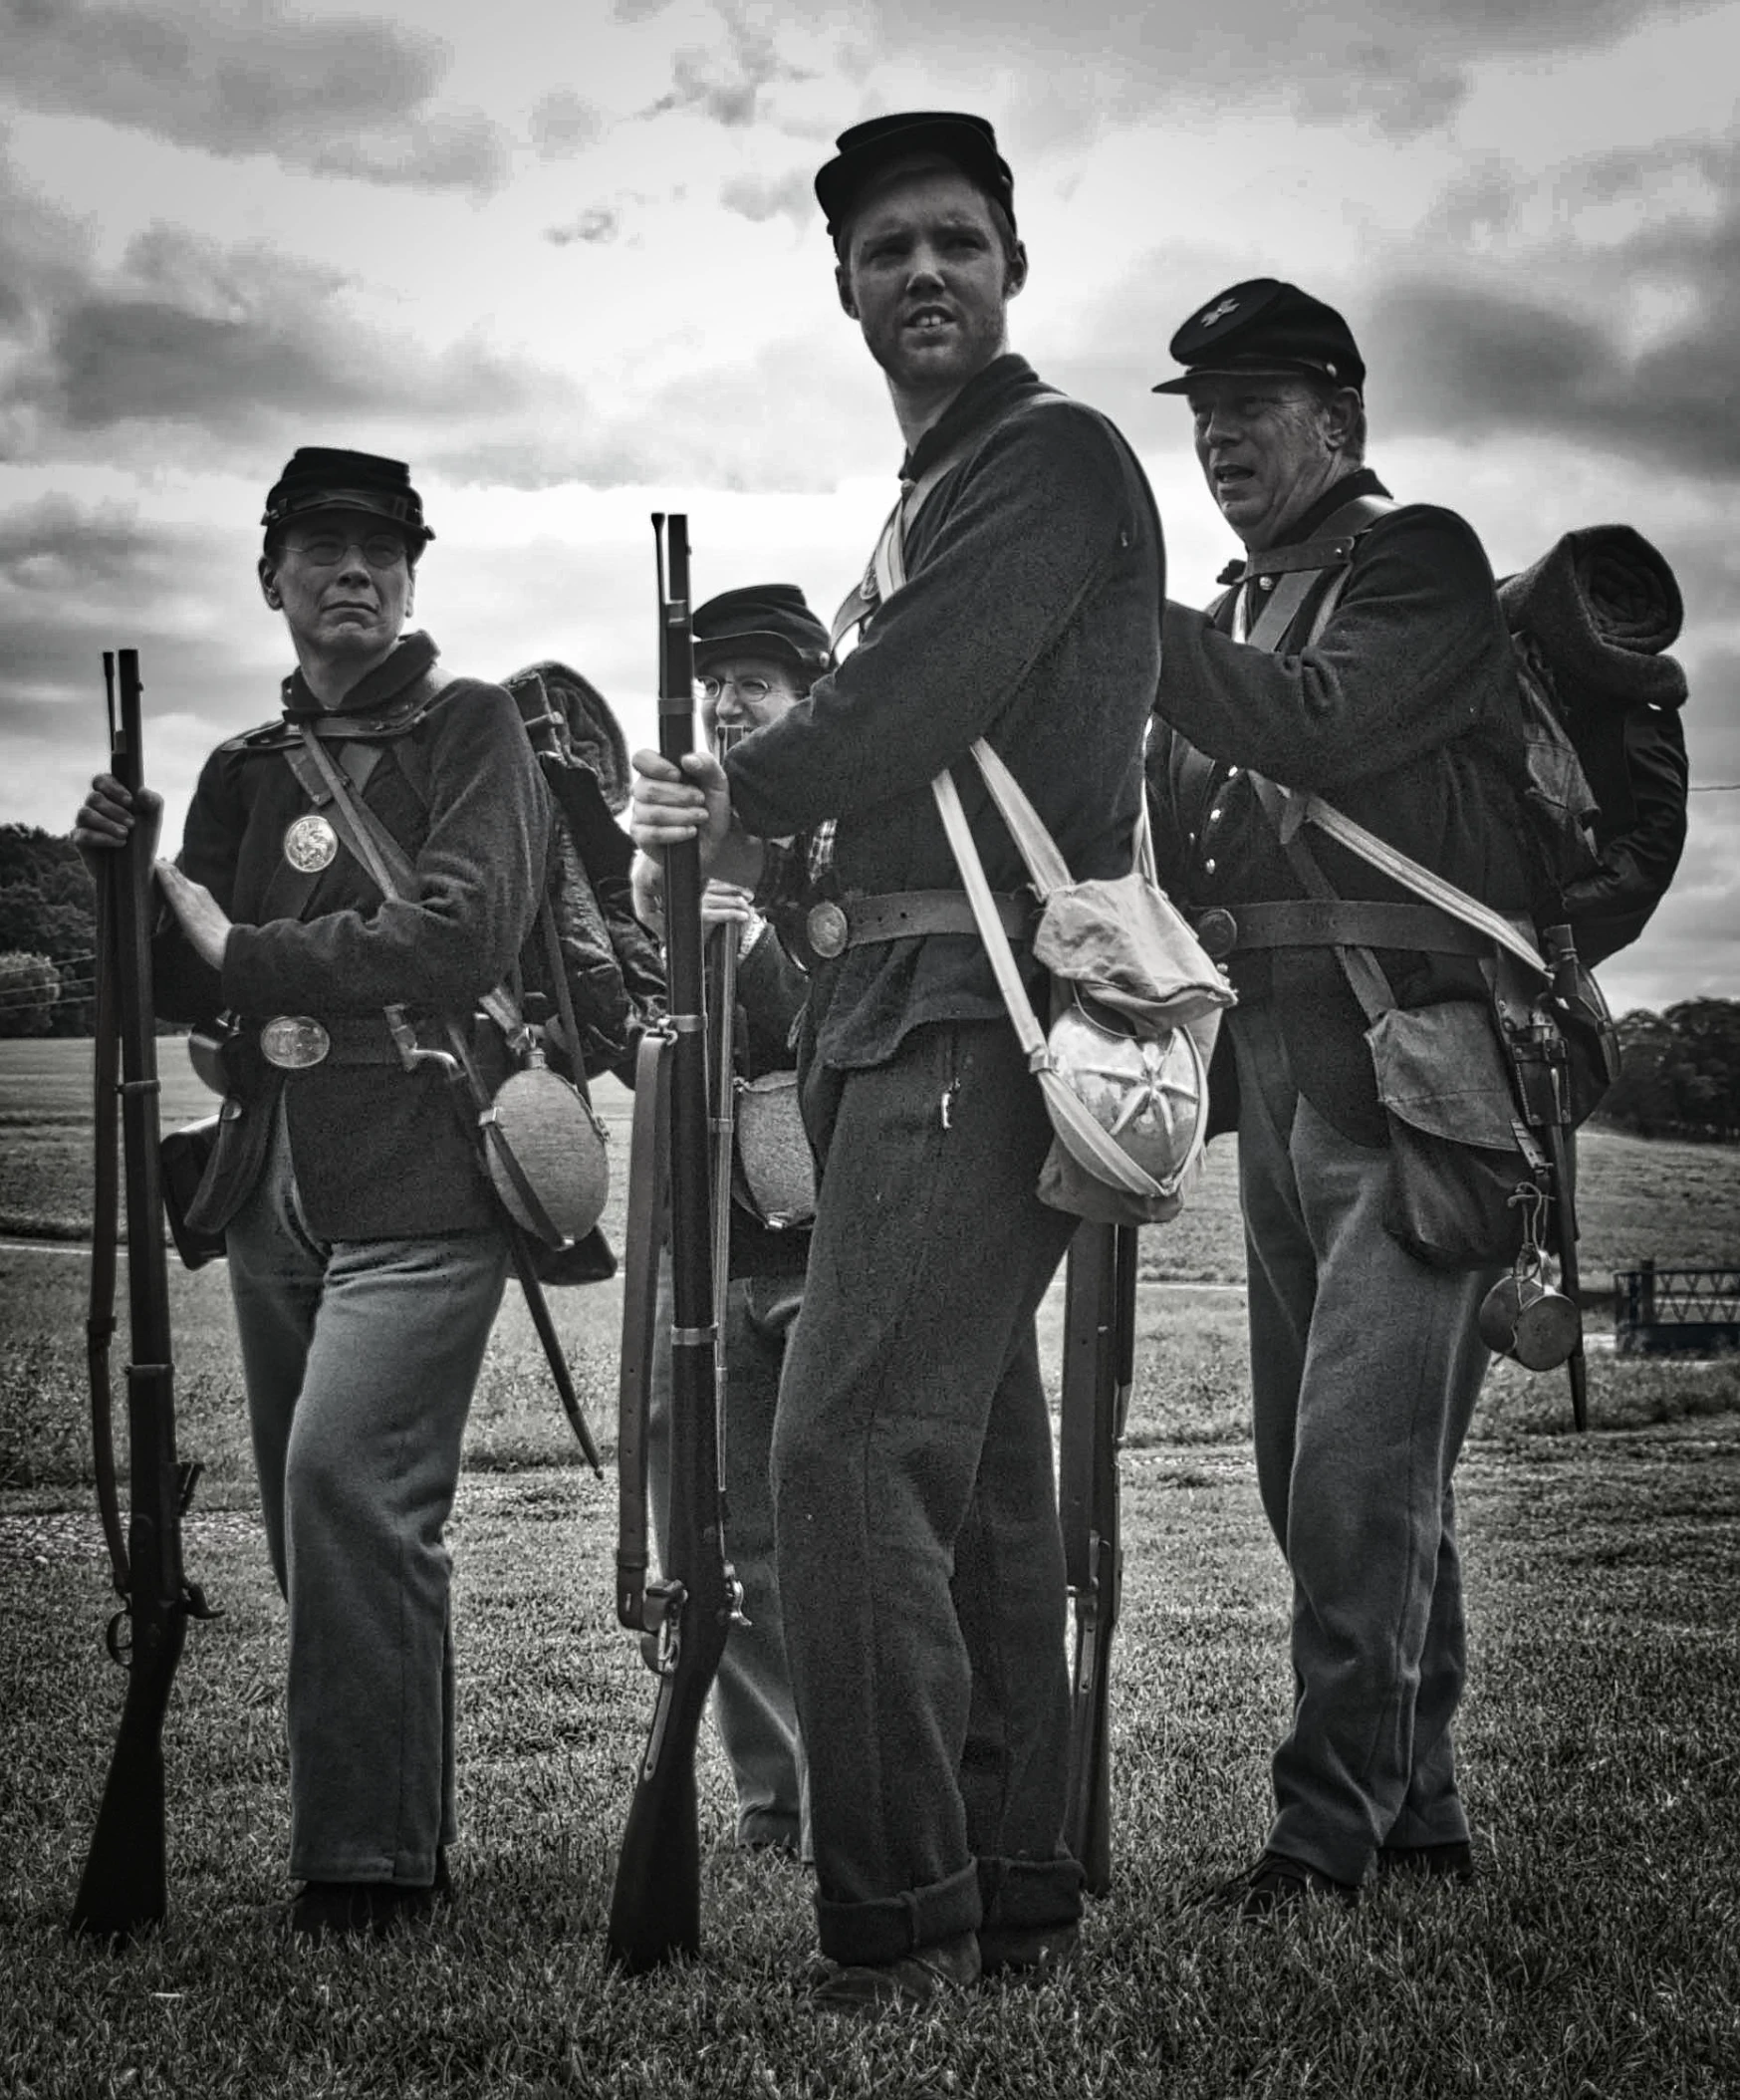 men in uniforms with guns stand together on the grass